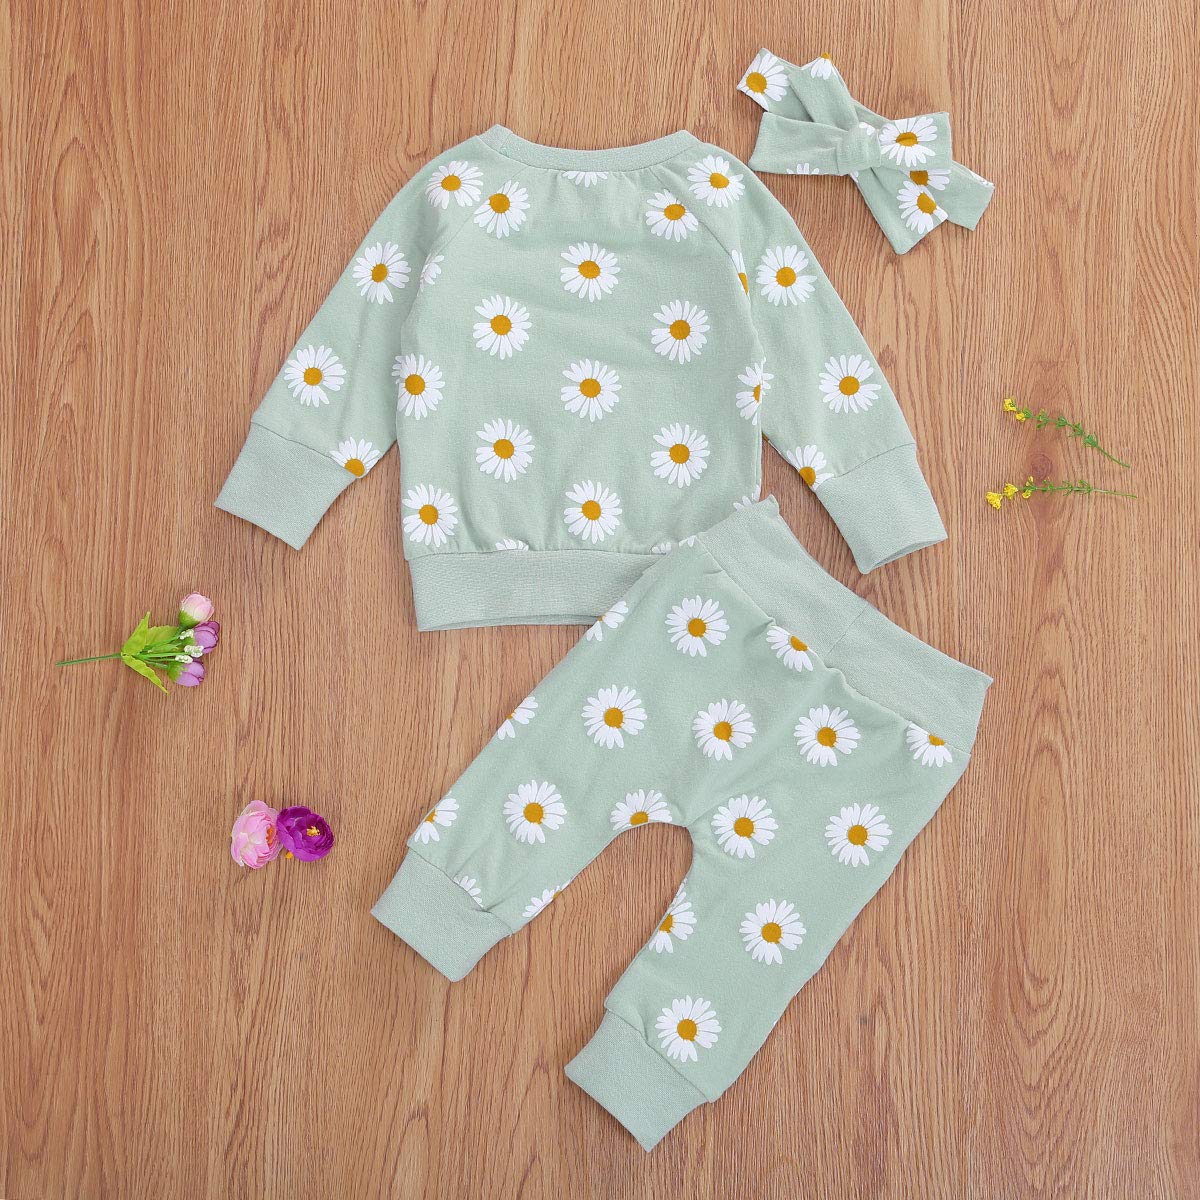 Newborn Infant Baby Girl Clothes Set Long Sleeve Sweatshirts Tops Pants Outfits Clothing Gifts 3 6 9 12 18 24 Months